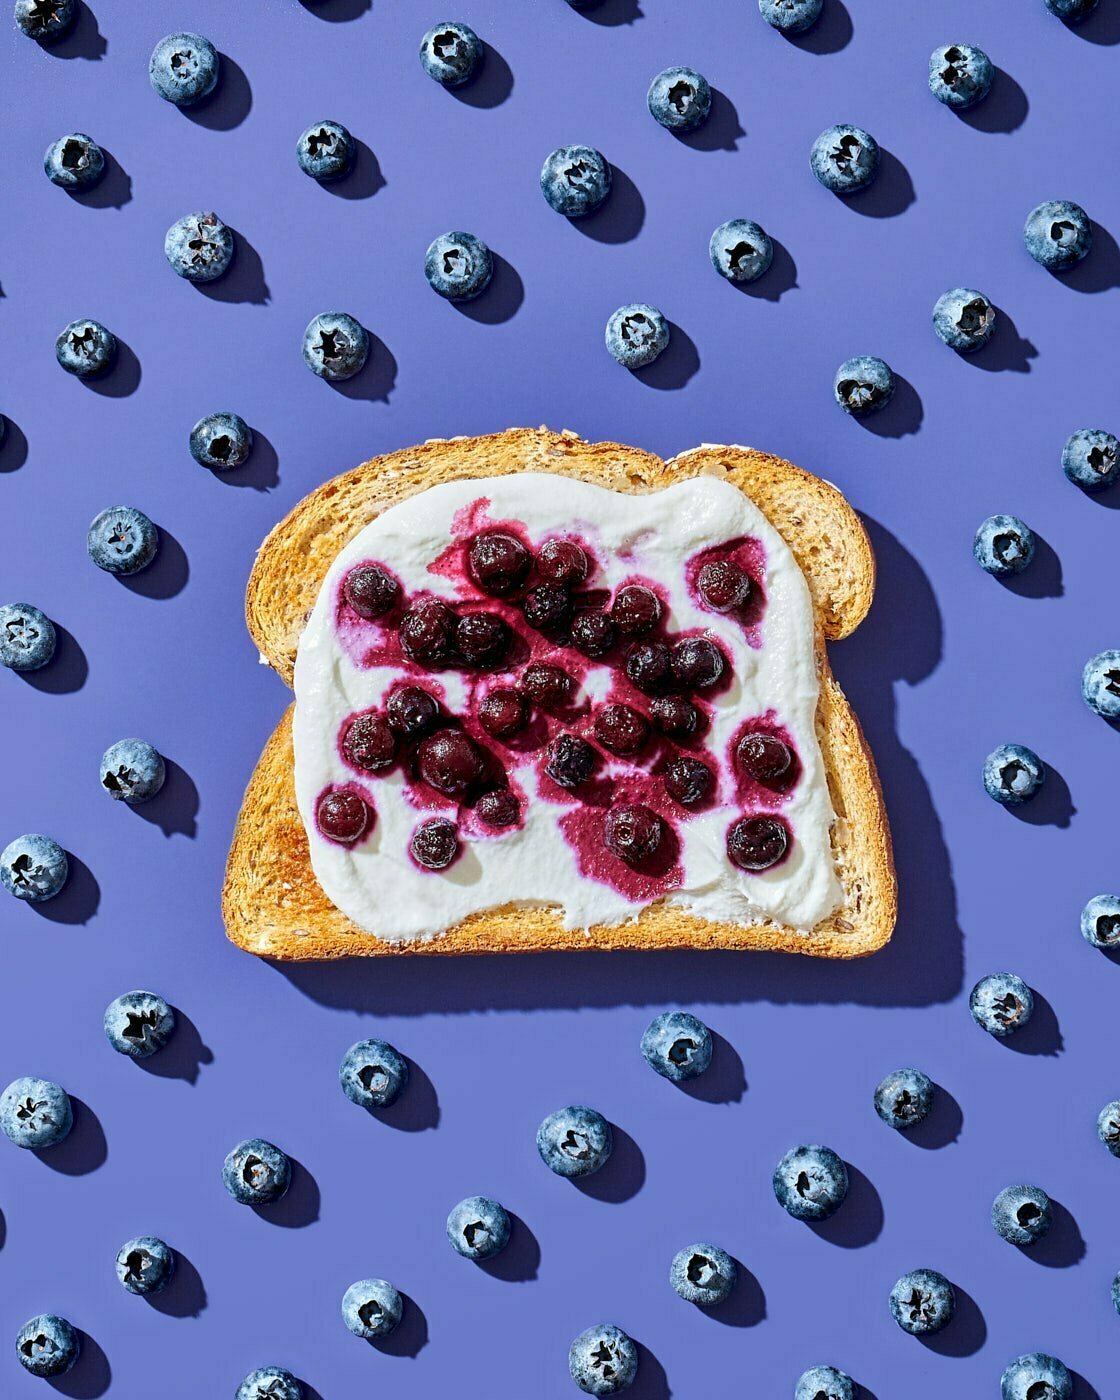 A single slice of whole wheat bread topped with greek yogurt and frozen blueberries on a purple background background with a pattern of fresh blueberries.